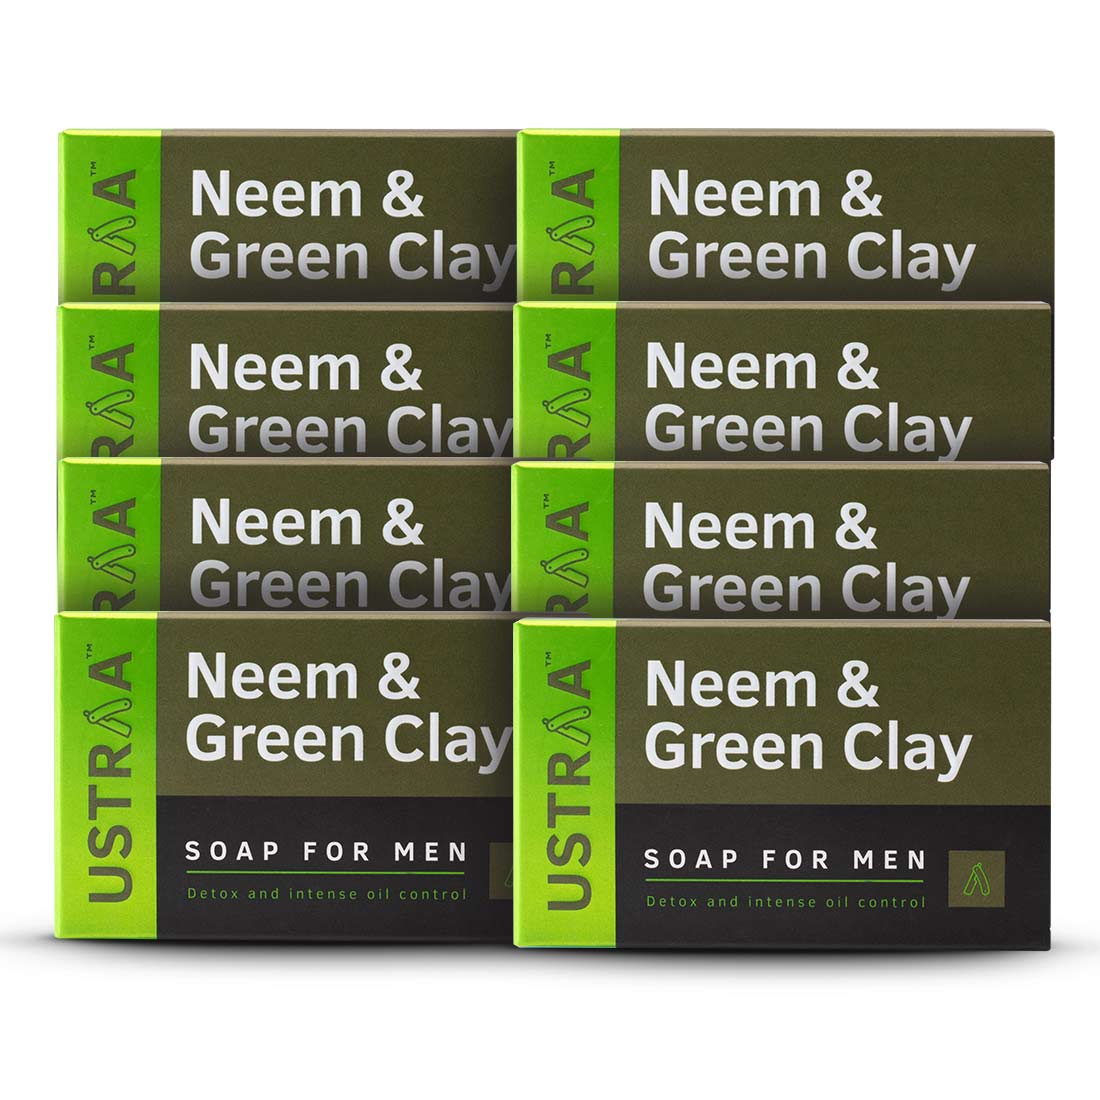 Best Deodorising Soap For Men - With Neem & Green Clay - Fights Germs With Anti Bacterial Properties